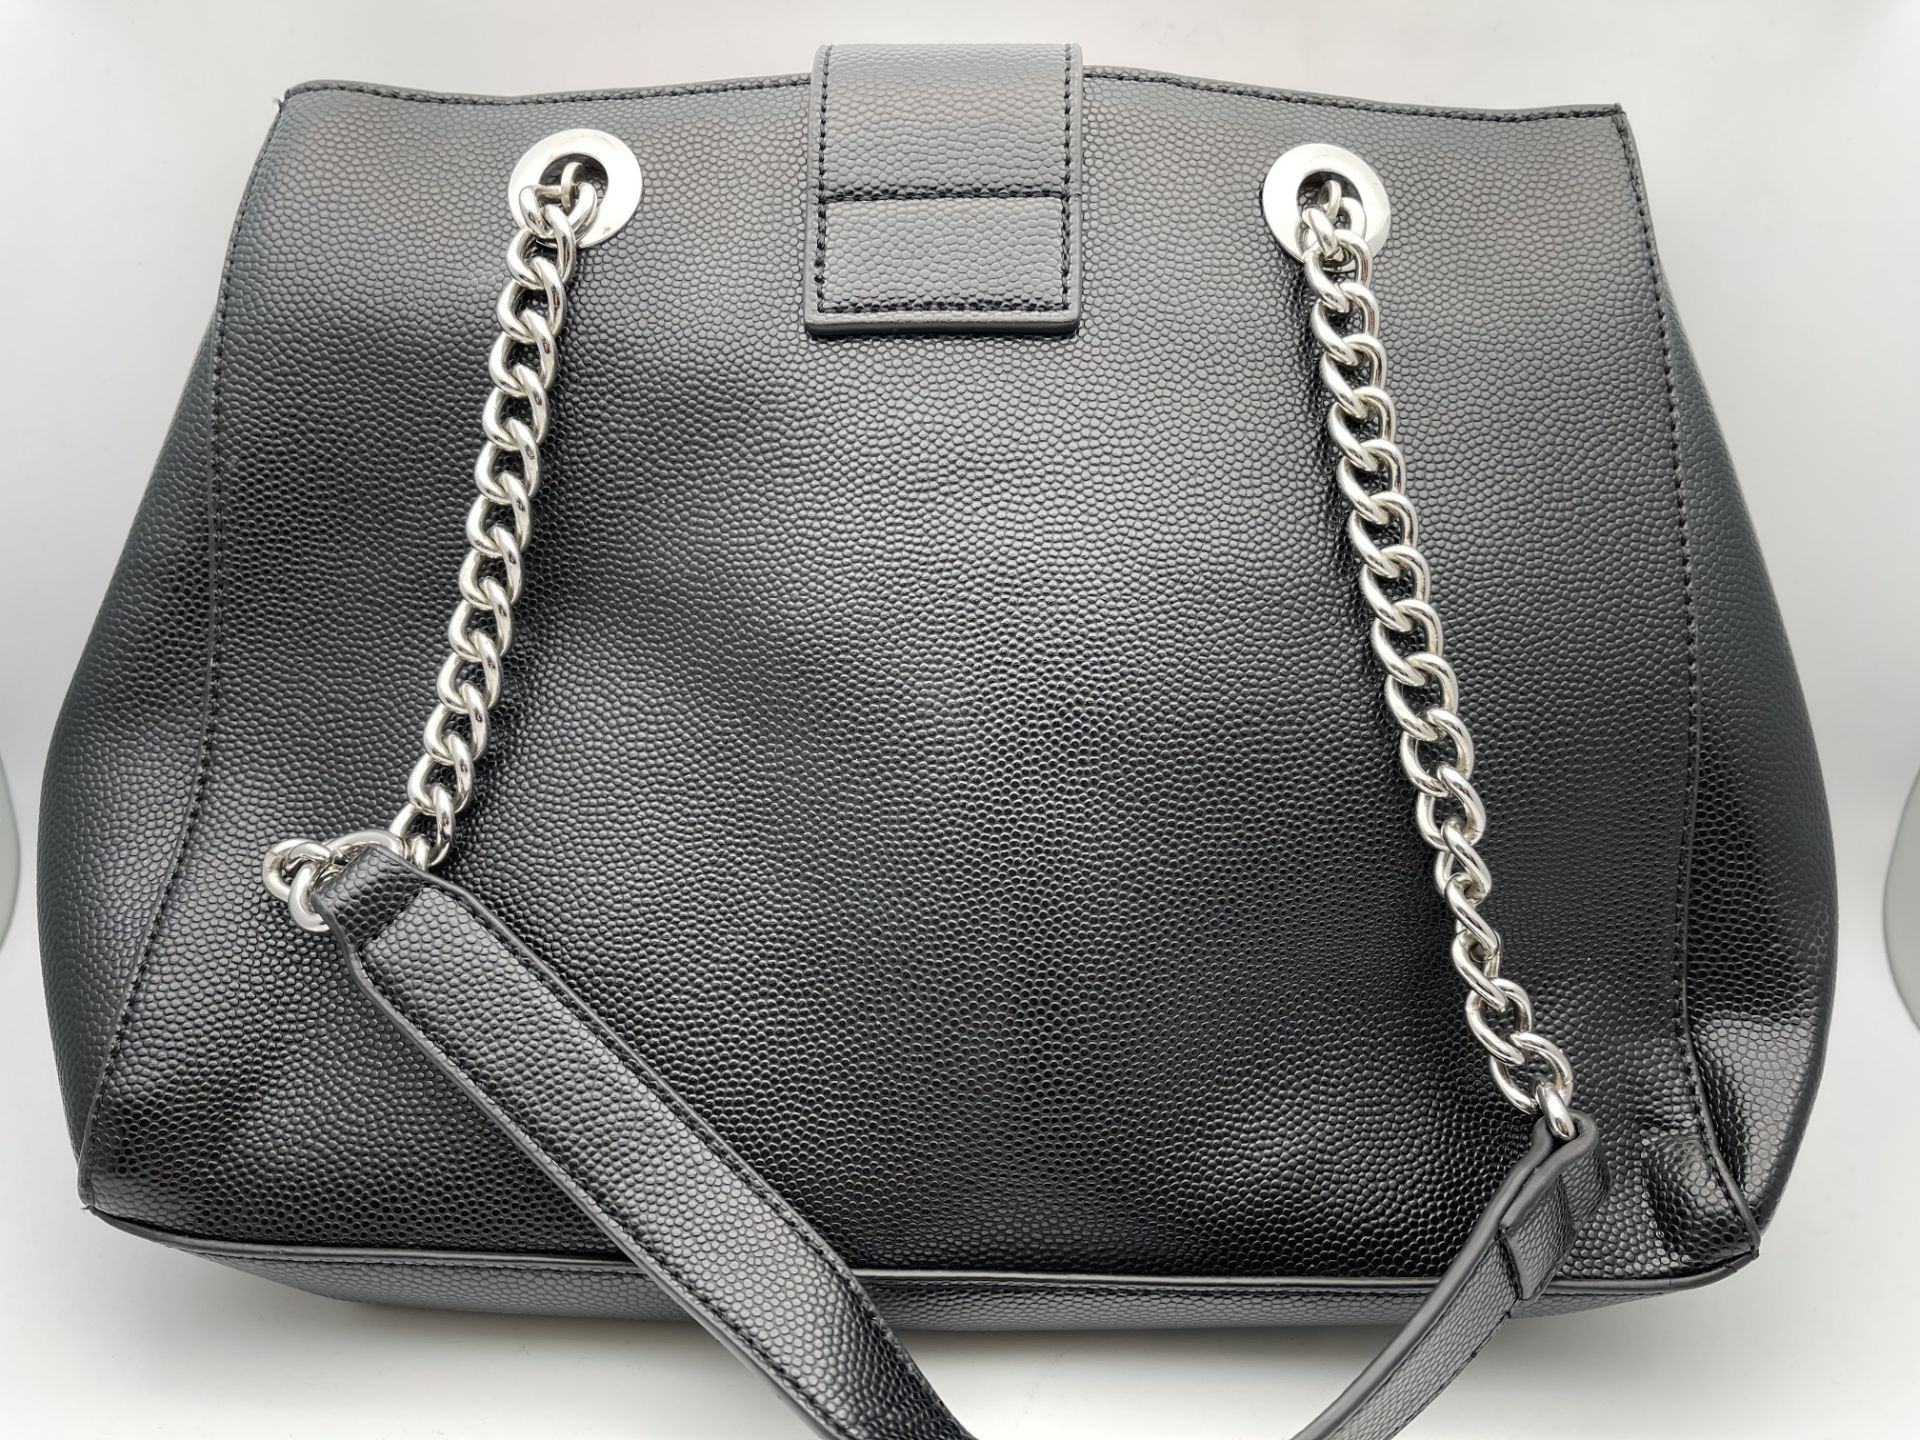 LADIES MARIO VALENTINO BLACK LEATHER HANDBAG, INCLUDES RED DUSTBAG, APPEARS NEW, RRP-£170. - Image 2 of 2